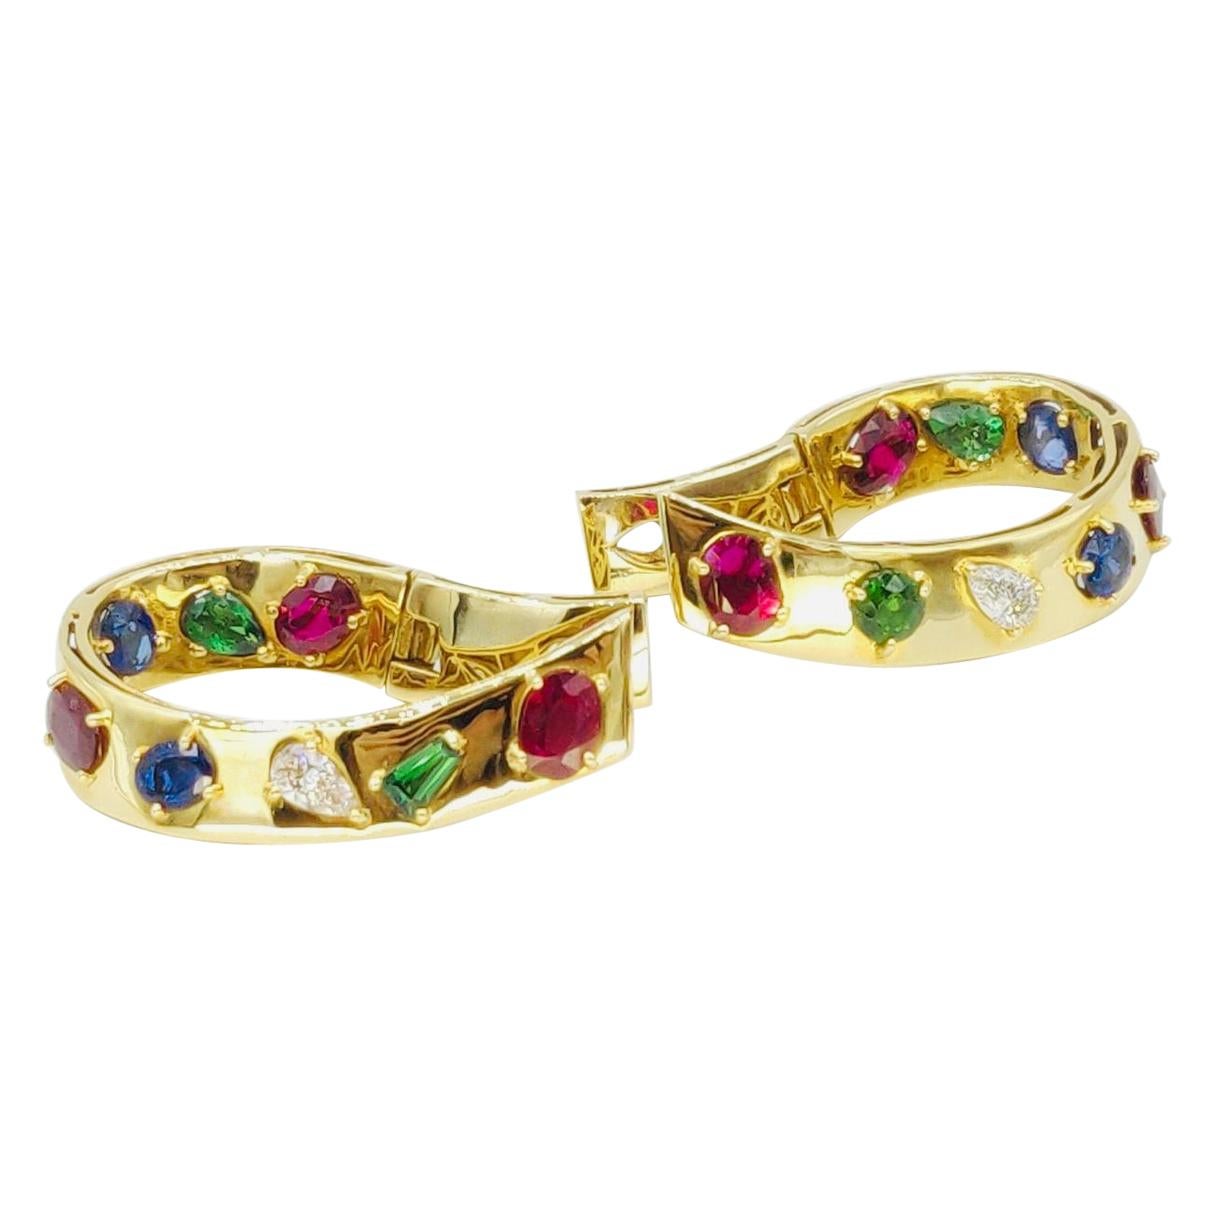 These vibrant shiny 18K yellow gold hoop earrings are embellished with vivid multicoloured gemstones in various cuts, both inside and outside. Magnificent colourful pieces for numerous occasions.

Gold: 18K Yellow Gold, 24.808 g
Diamond: